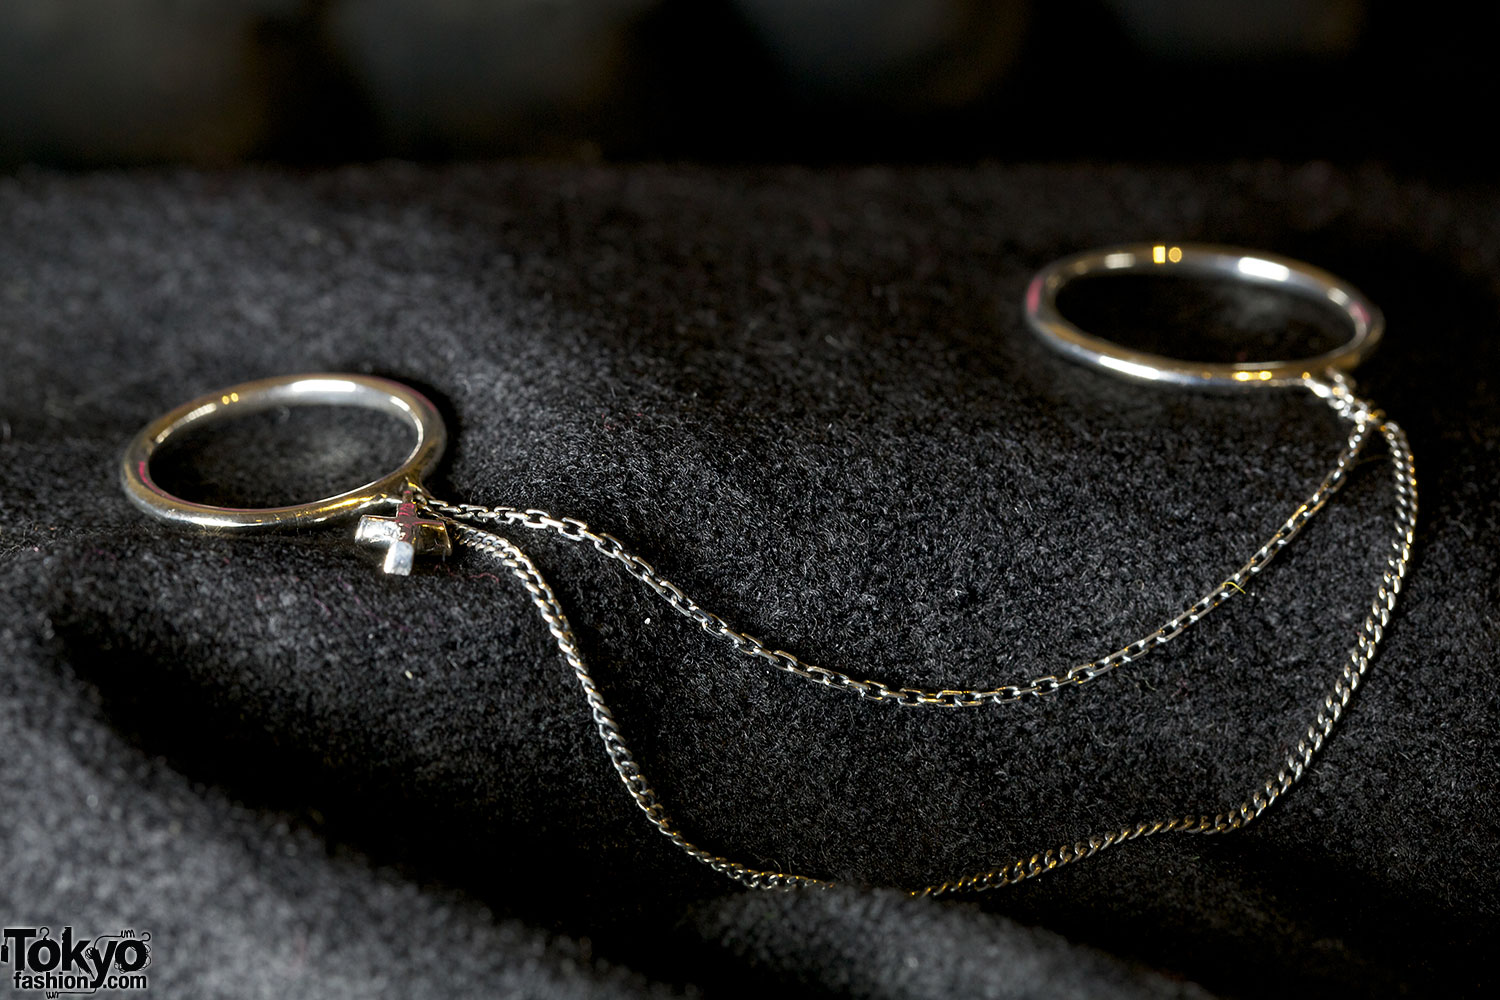 Alice Black Jewelry 2013 S/S Collection “The Meaning of Life